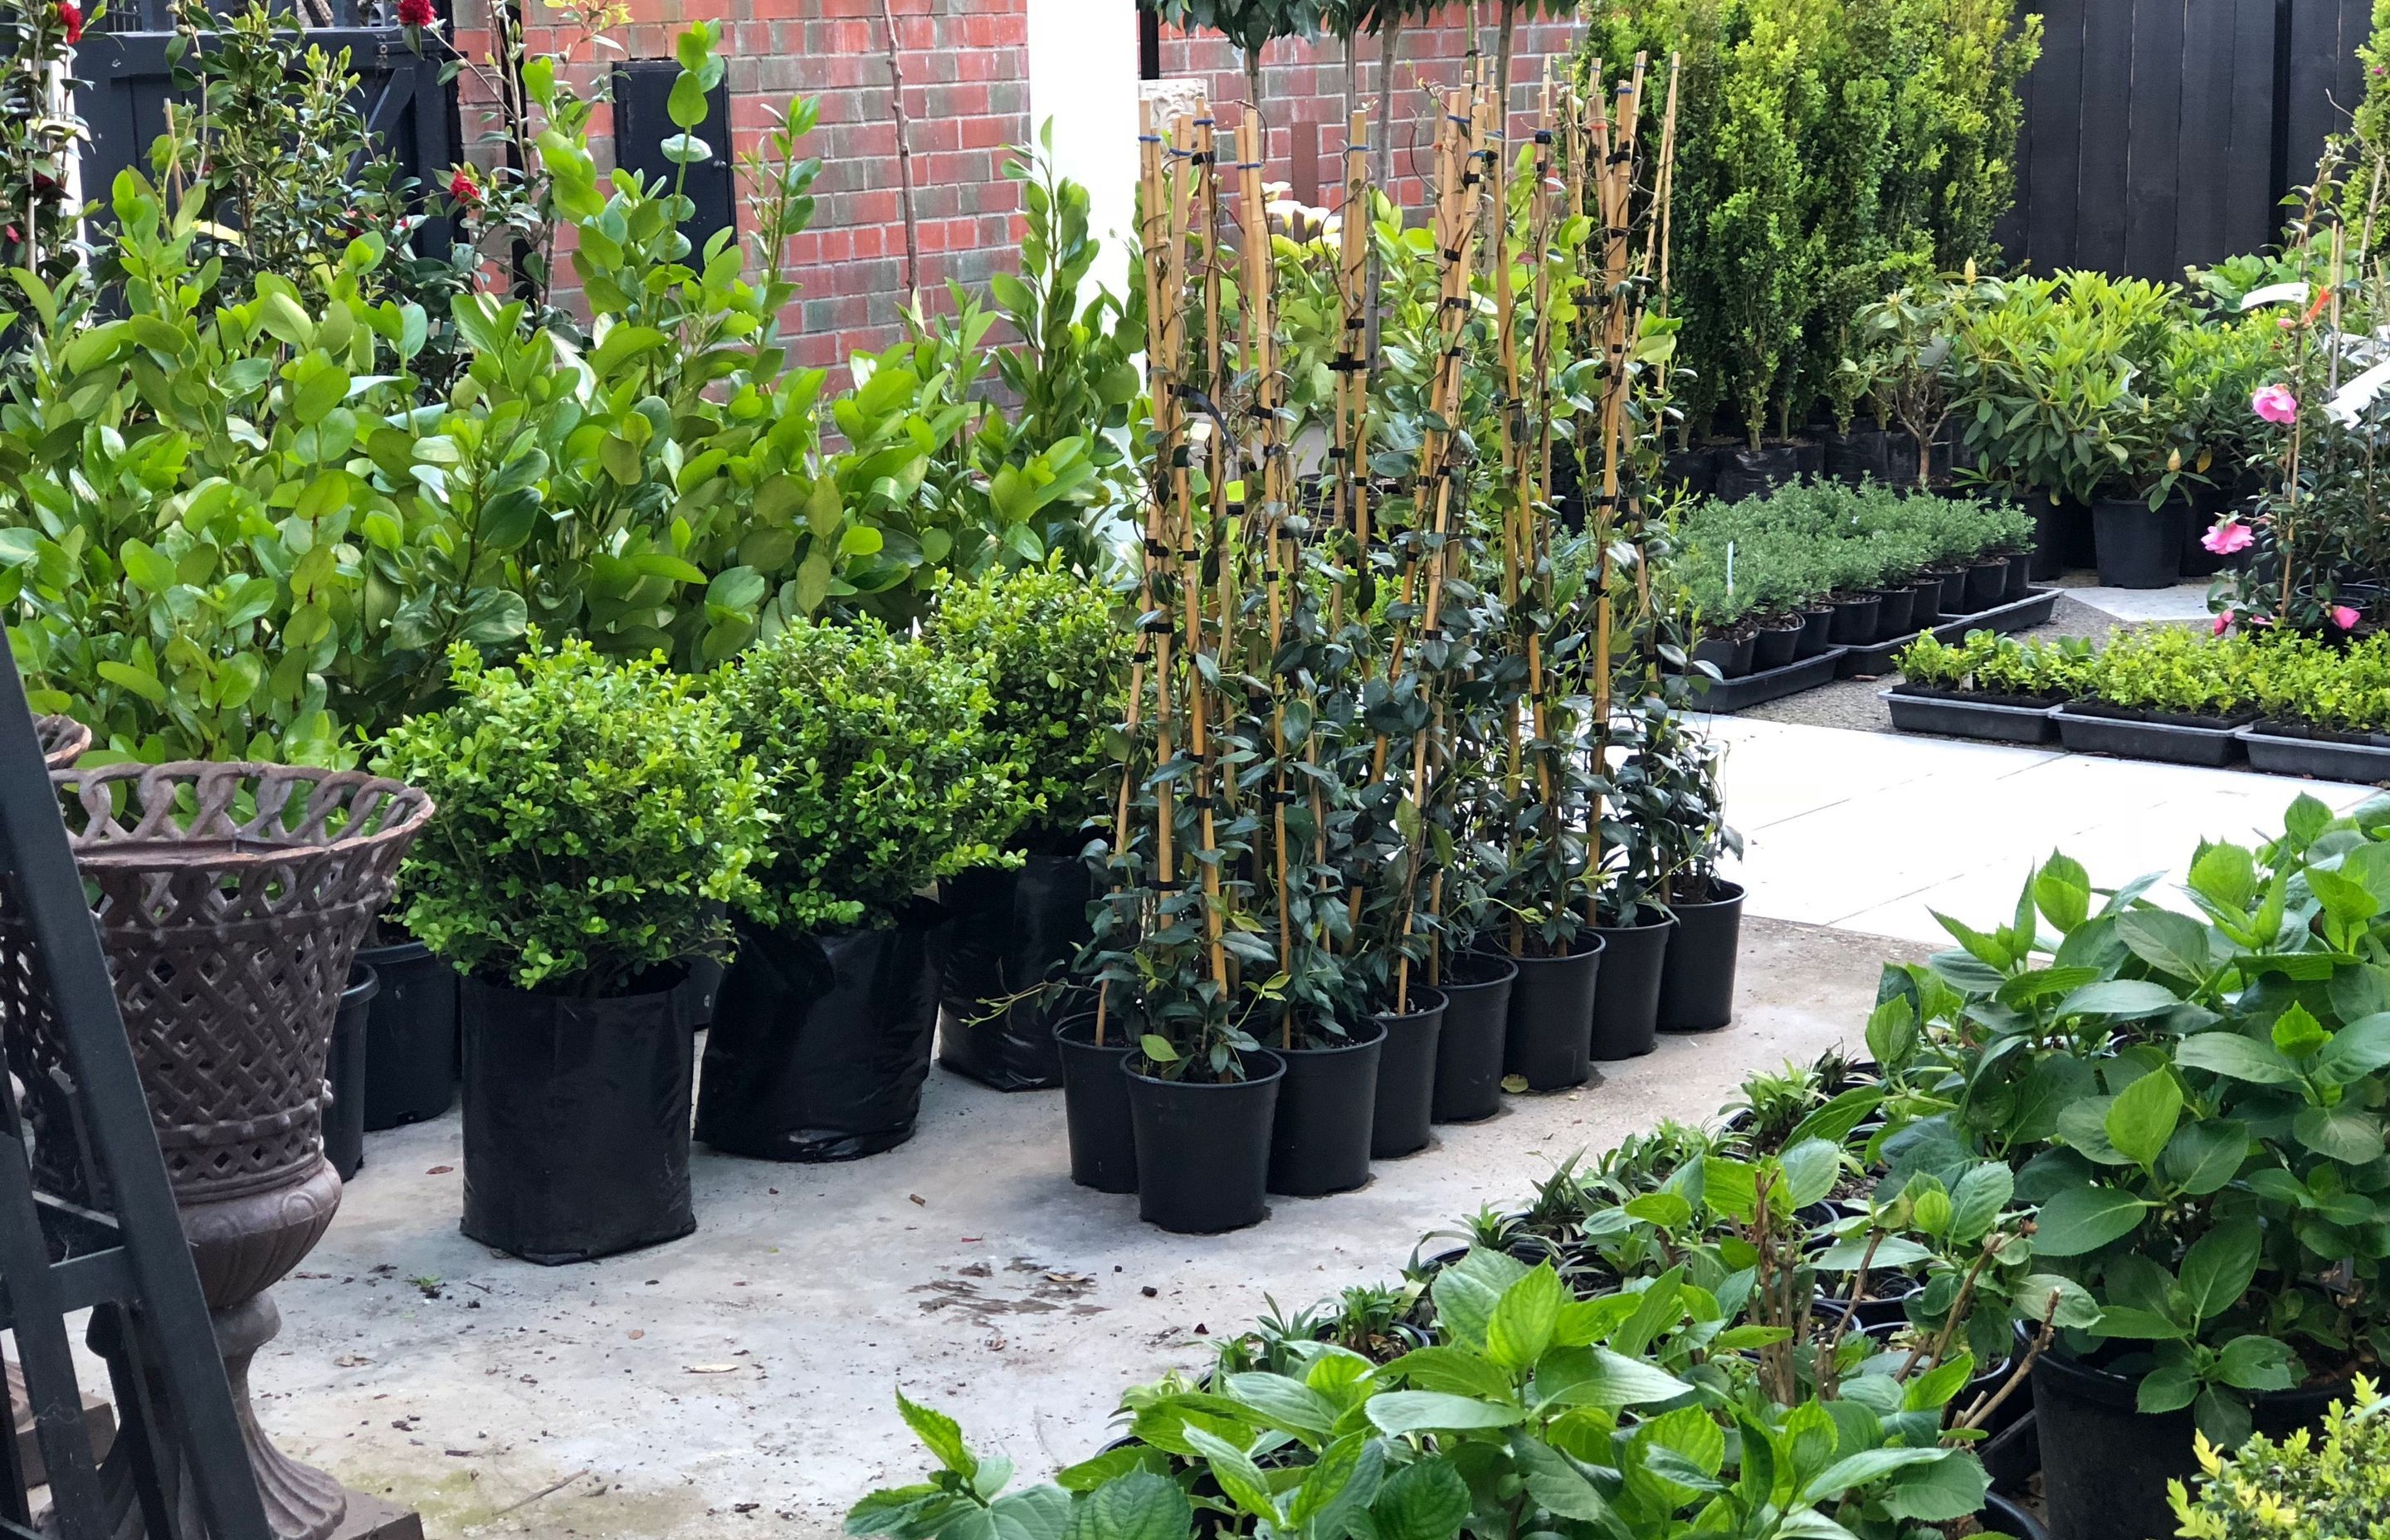 Plants in waiting, going into gardens and being delivered around New Zealand